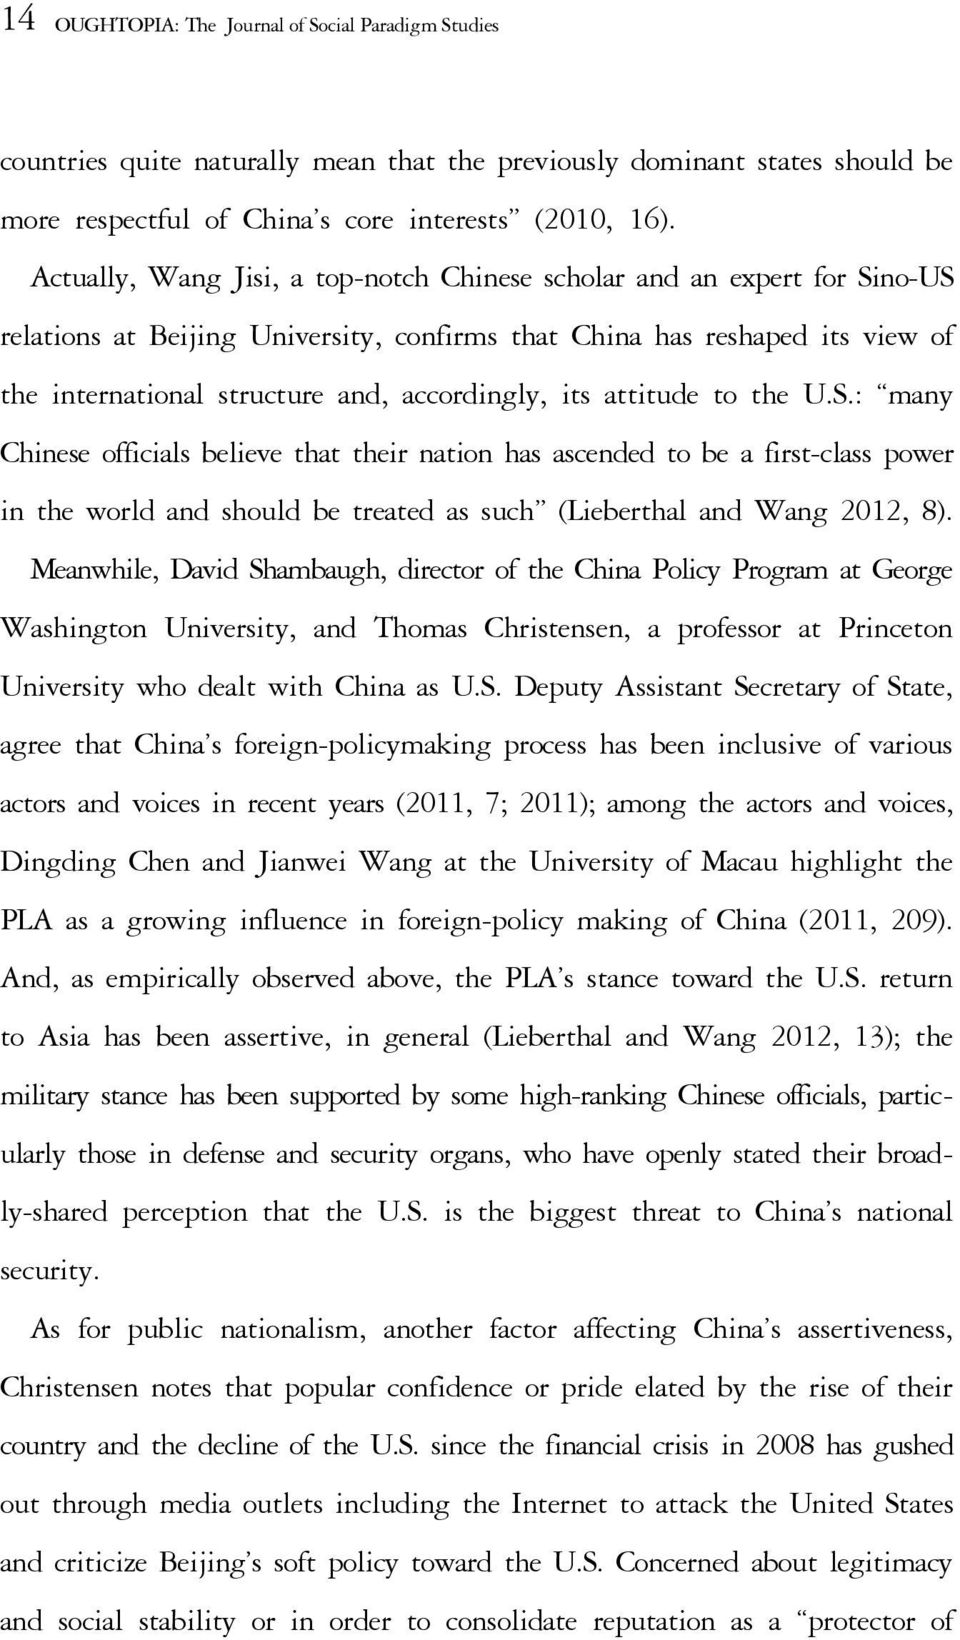 its attitude to the U.S.: many Chinese officials believe that their nation has ascended to be a first-class power in the world and should be treated as such (Lieberthal and Wang 2012, 8).